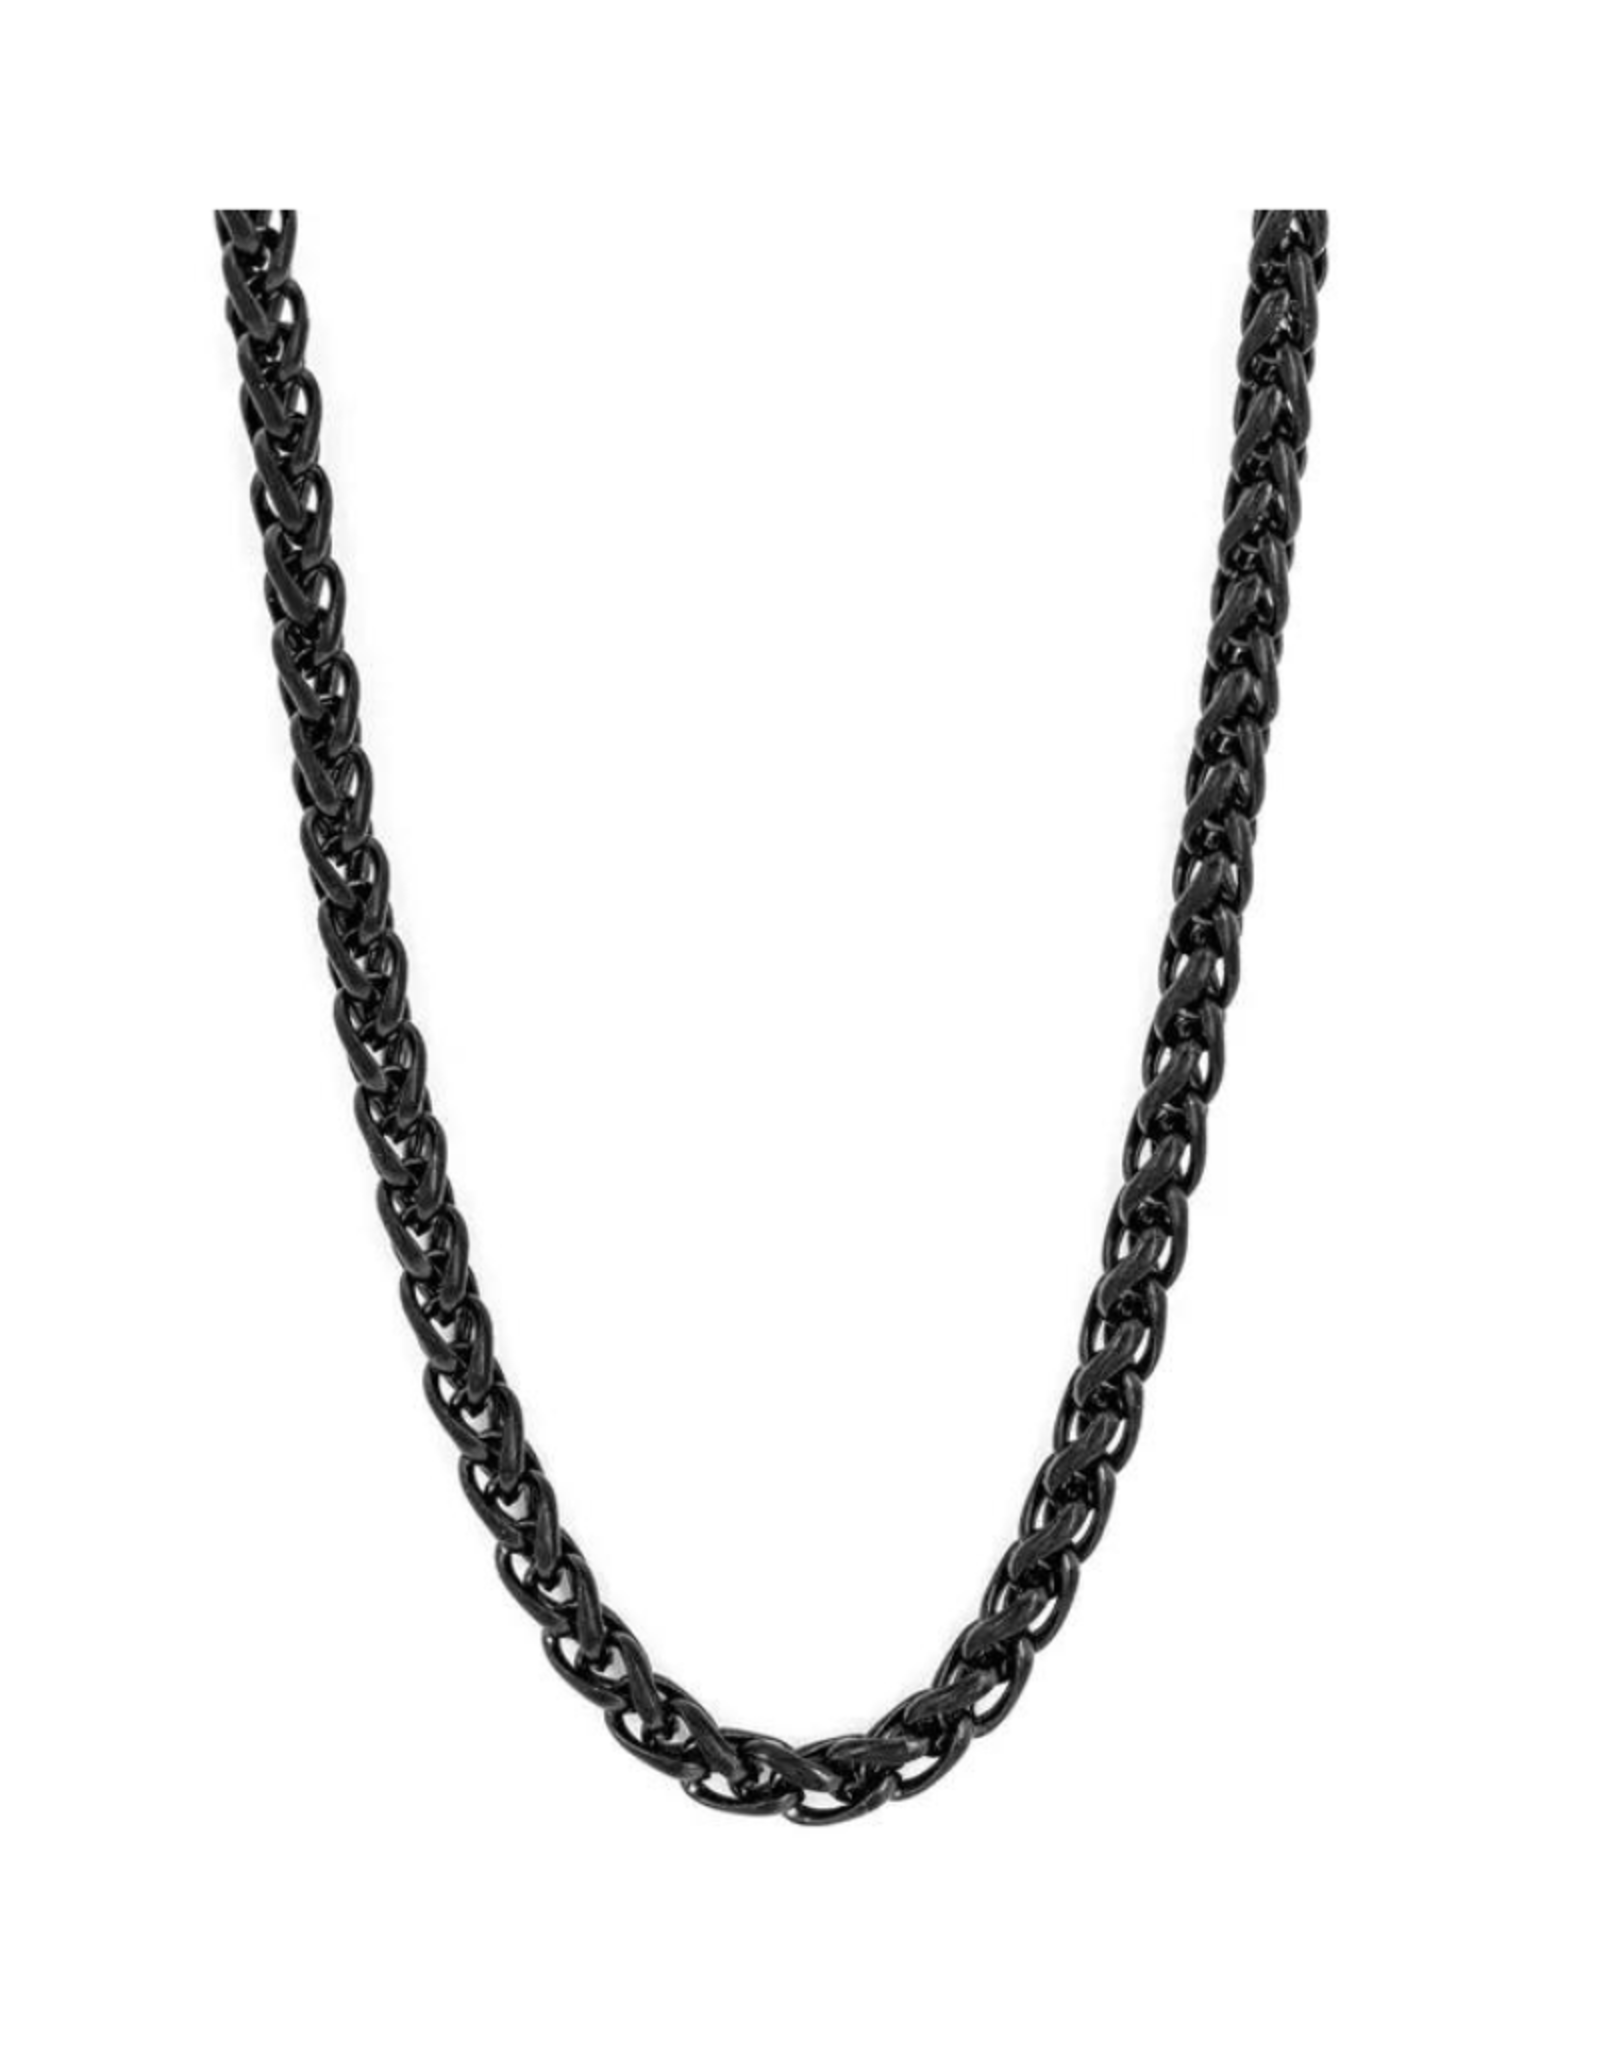 NECKLACE-SPIGA BLACK STAINLESS STEEL CHAIN